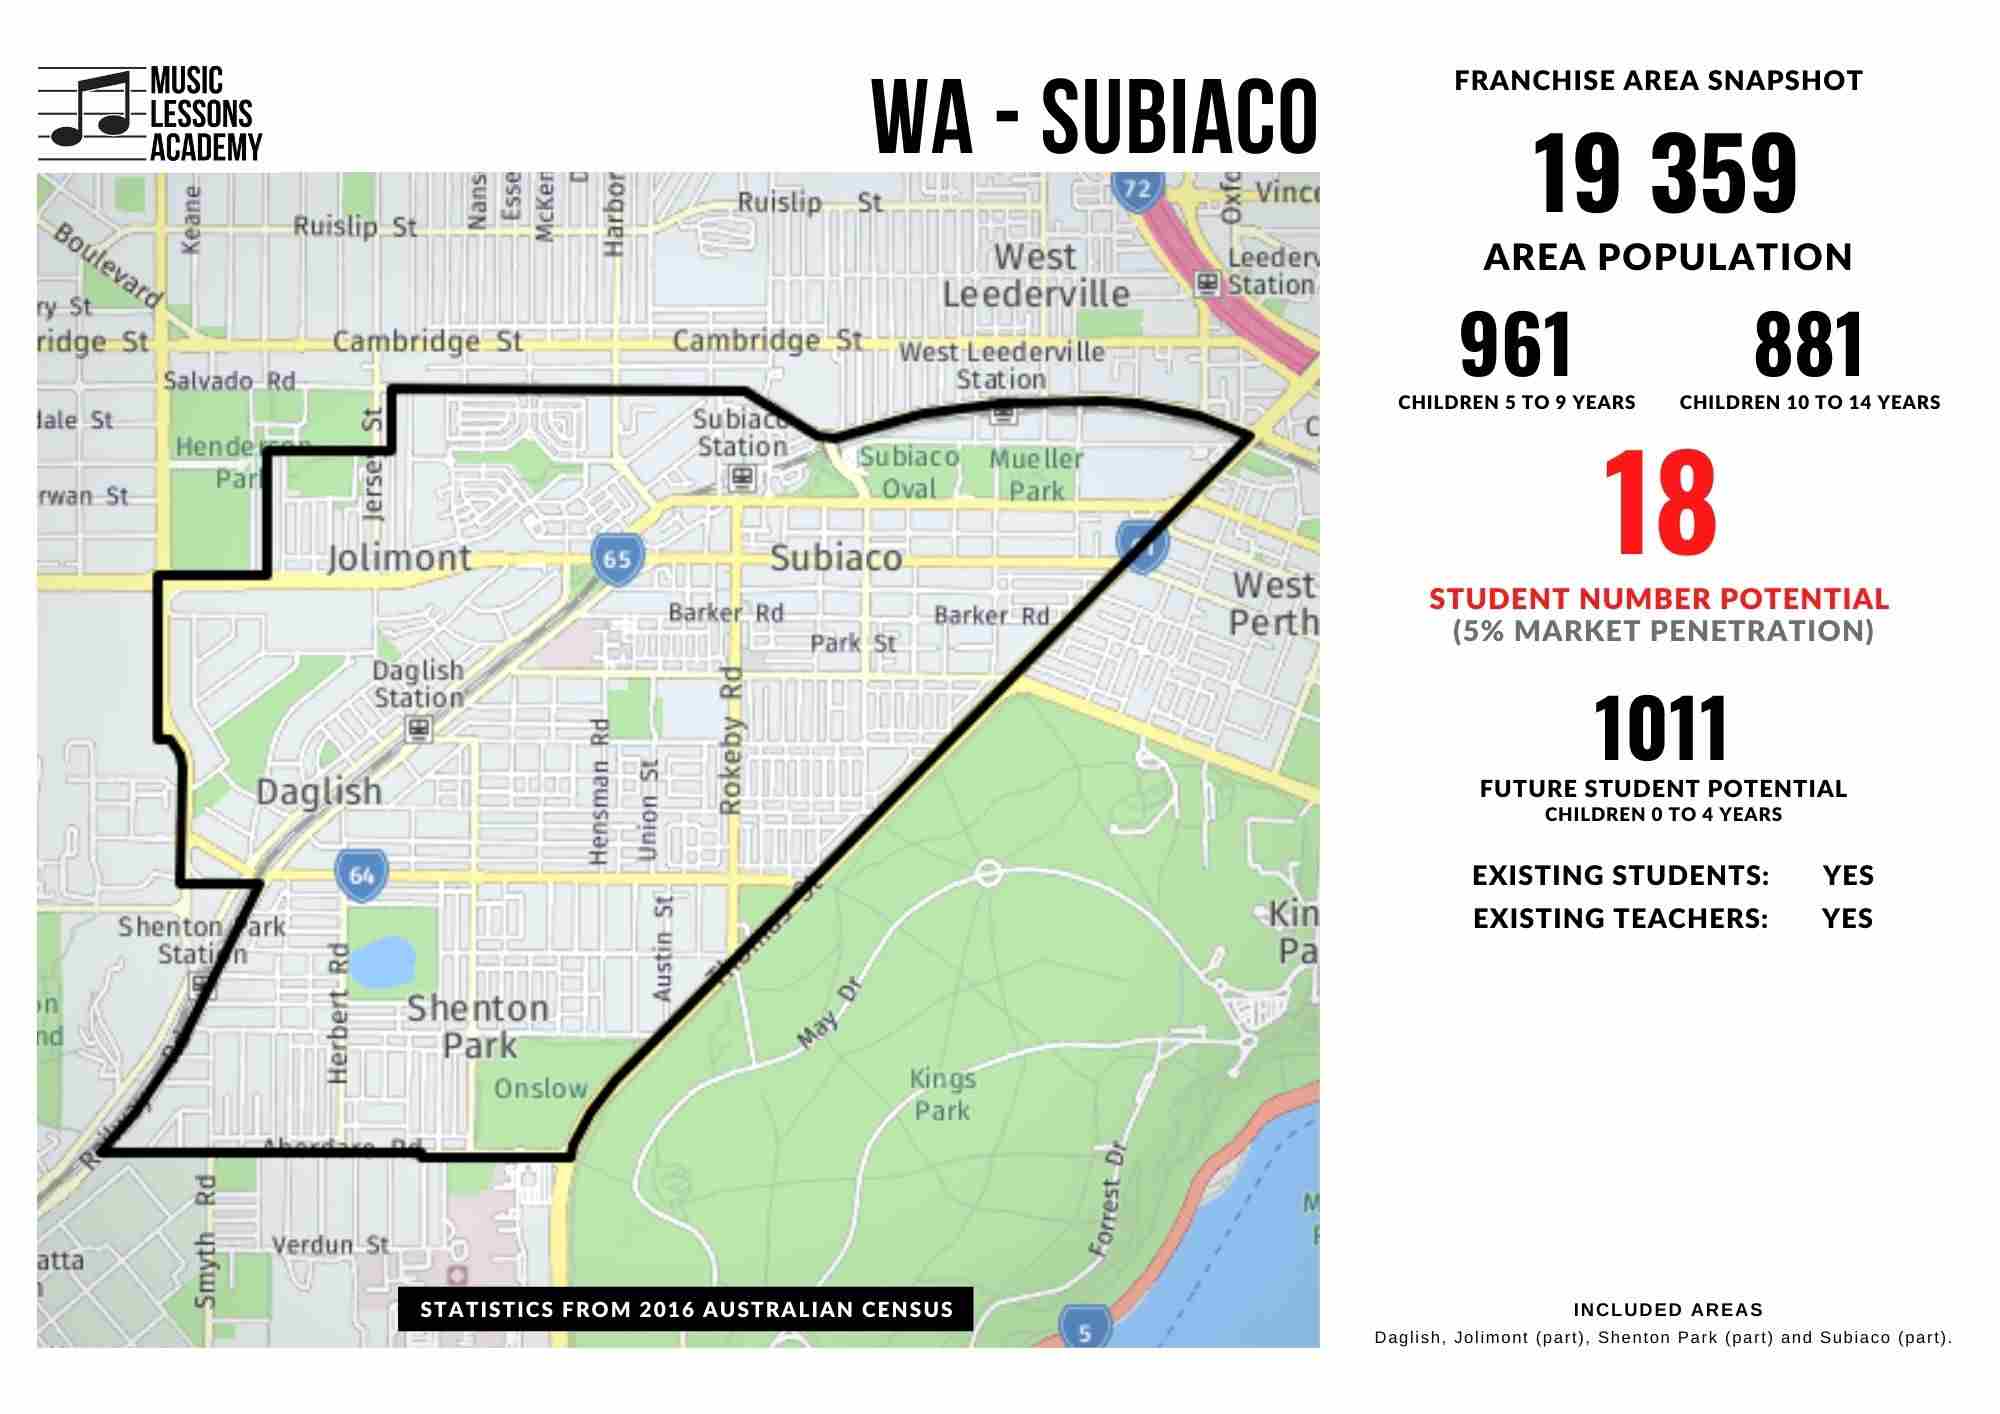 WA Subiaco Franchise for sale